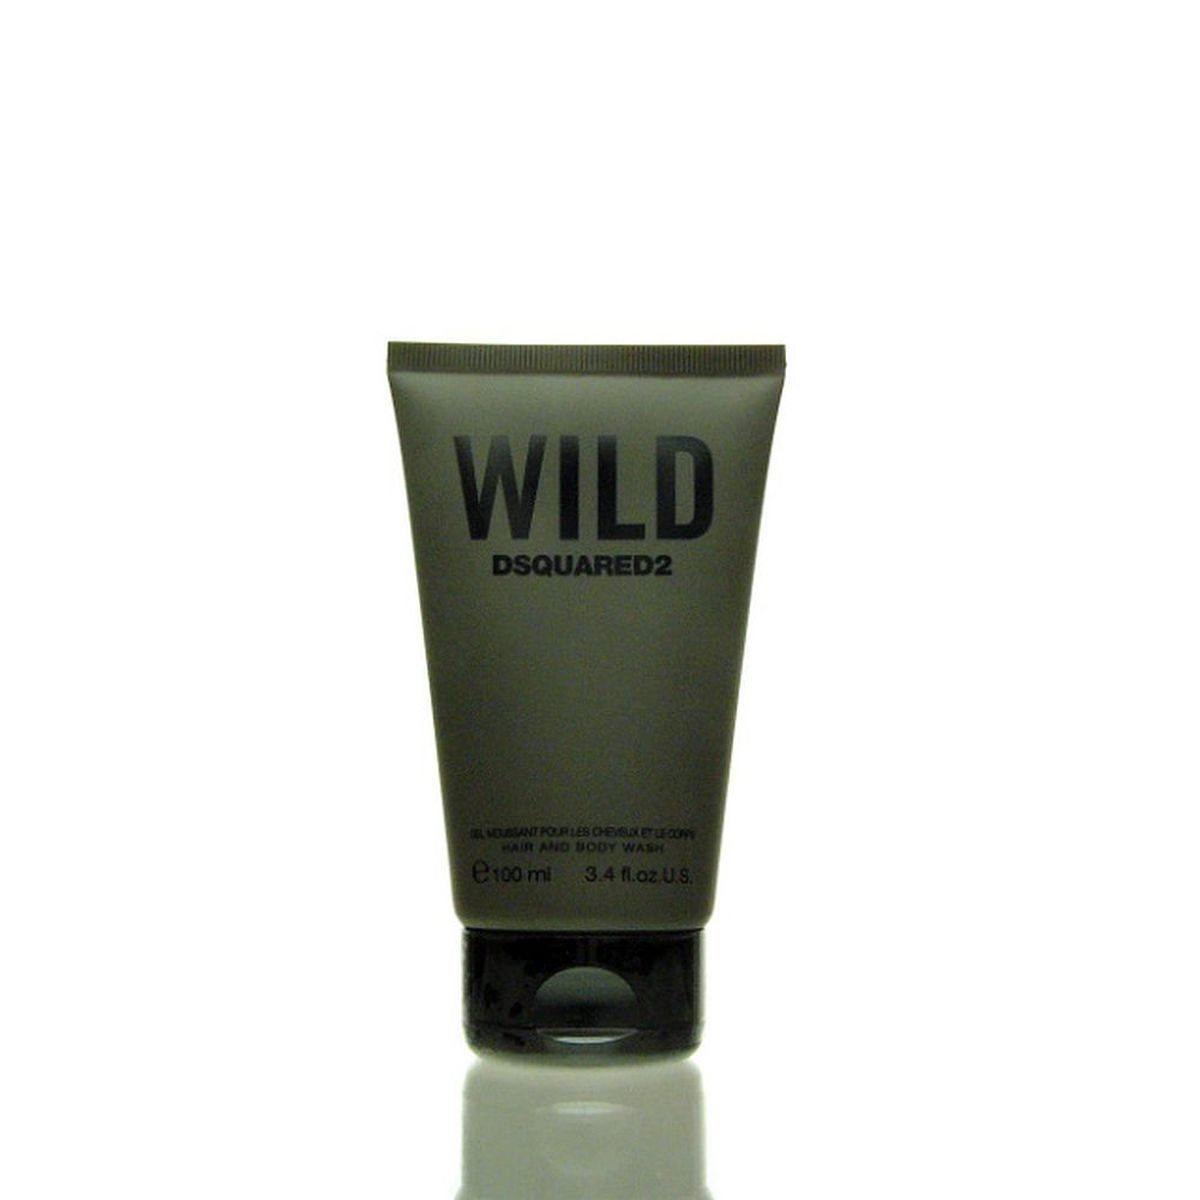 ml Body Dsquared2 100 Dsquared² Wild Hair Duschpflege Wash and